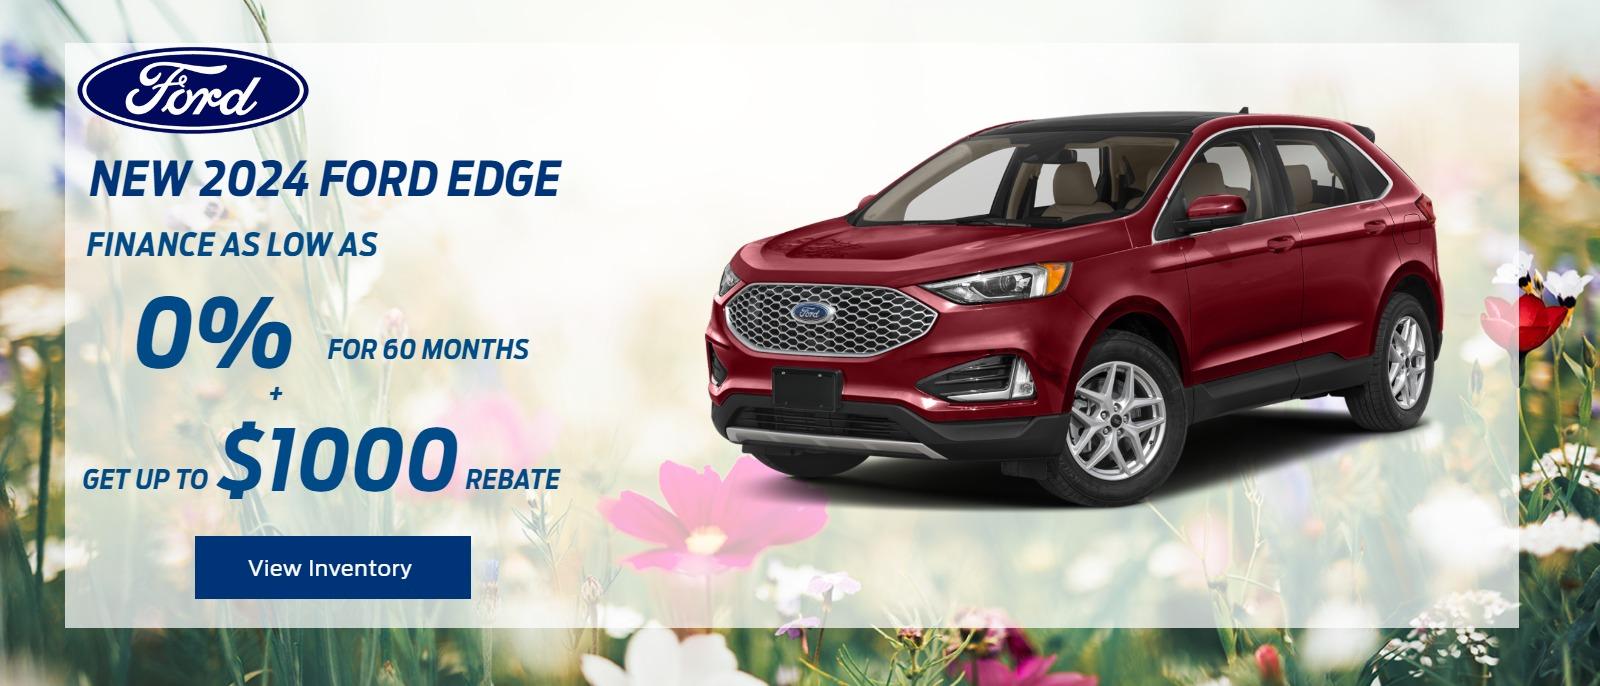 New 2023 Ford Edge
 Finance as low as 1.9% for 36 months + Get Up to $1000 in Lease Renewal